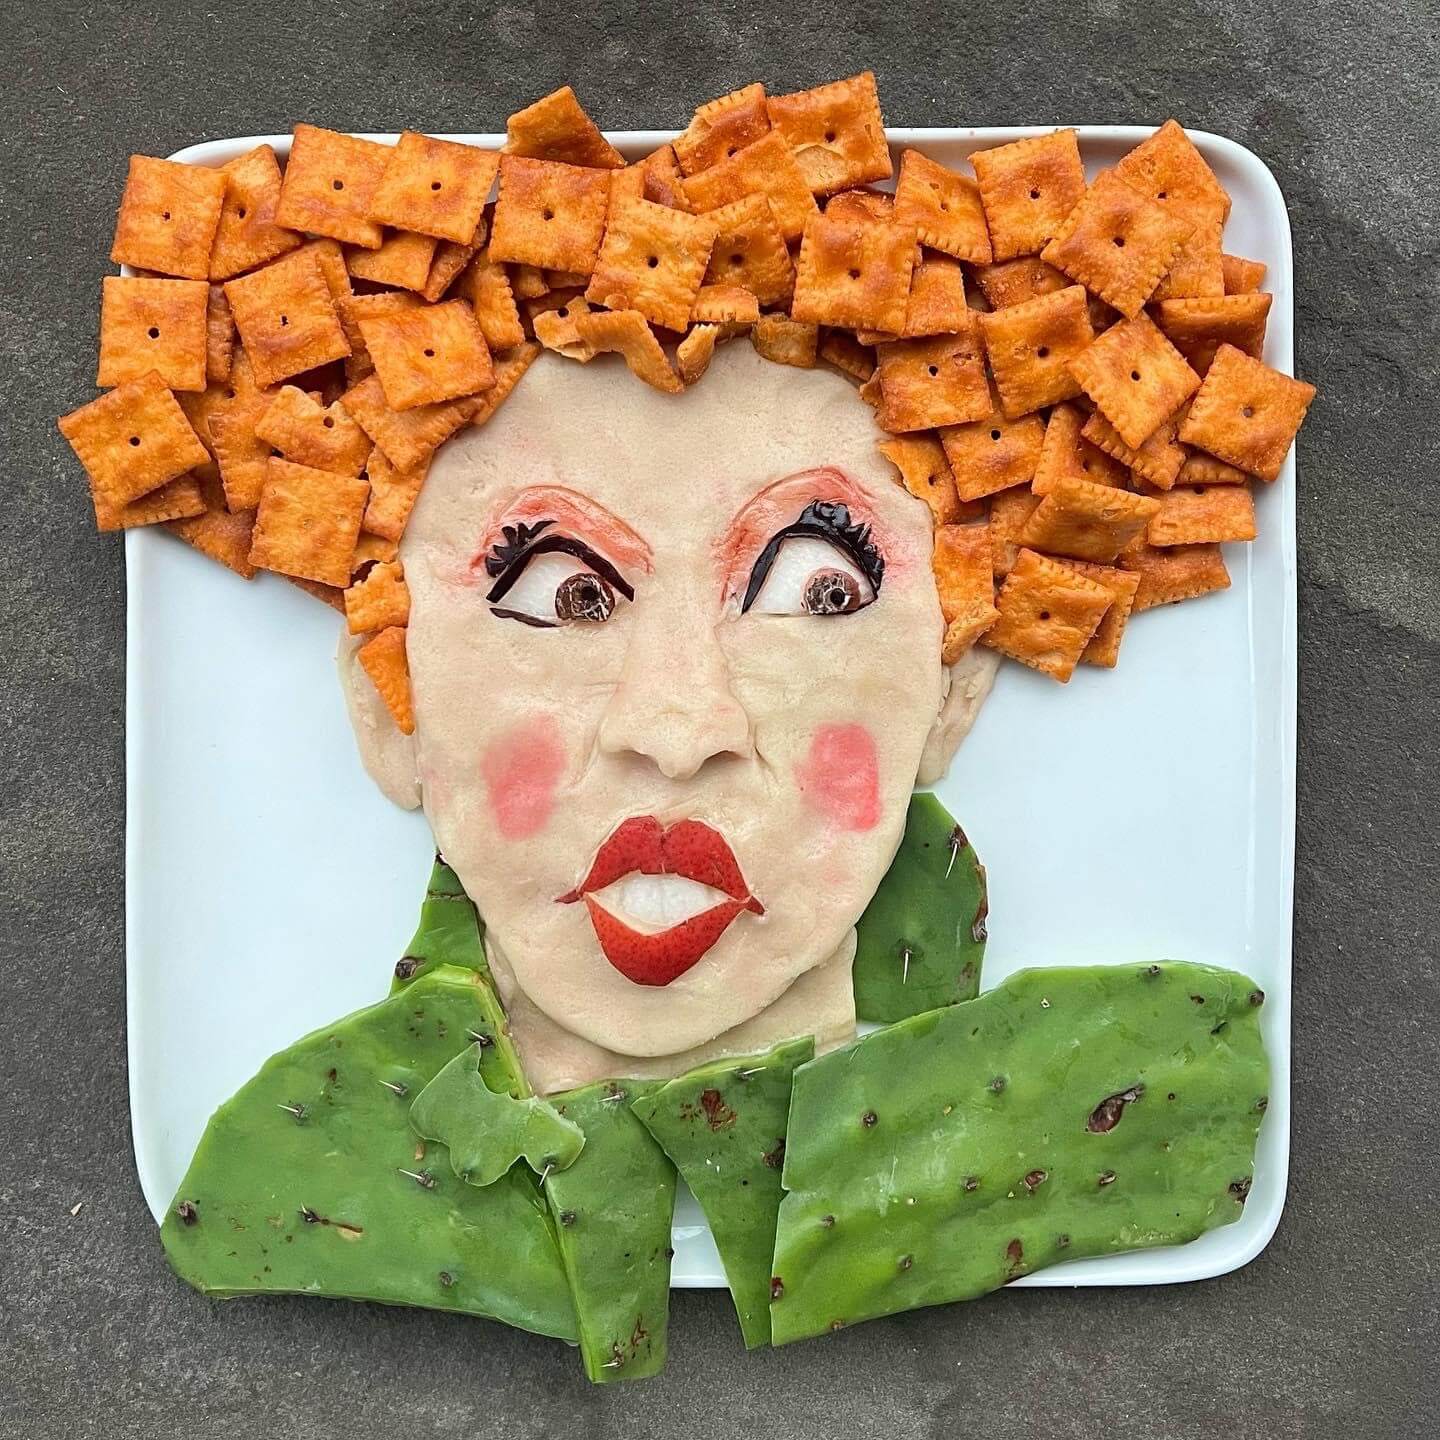 Winifred Sanderson from Hocus Pocus food art by Harley Langberg